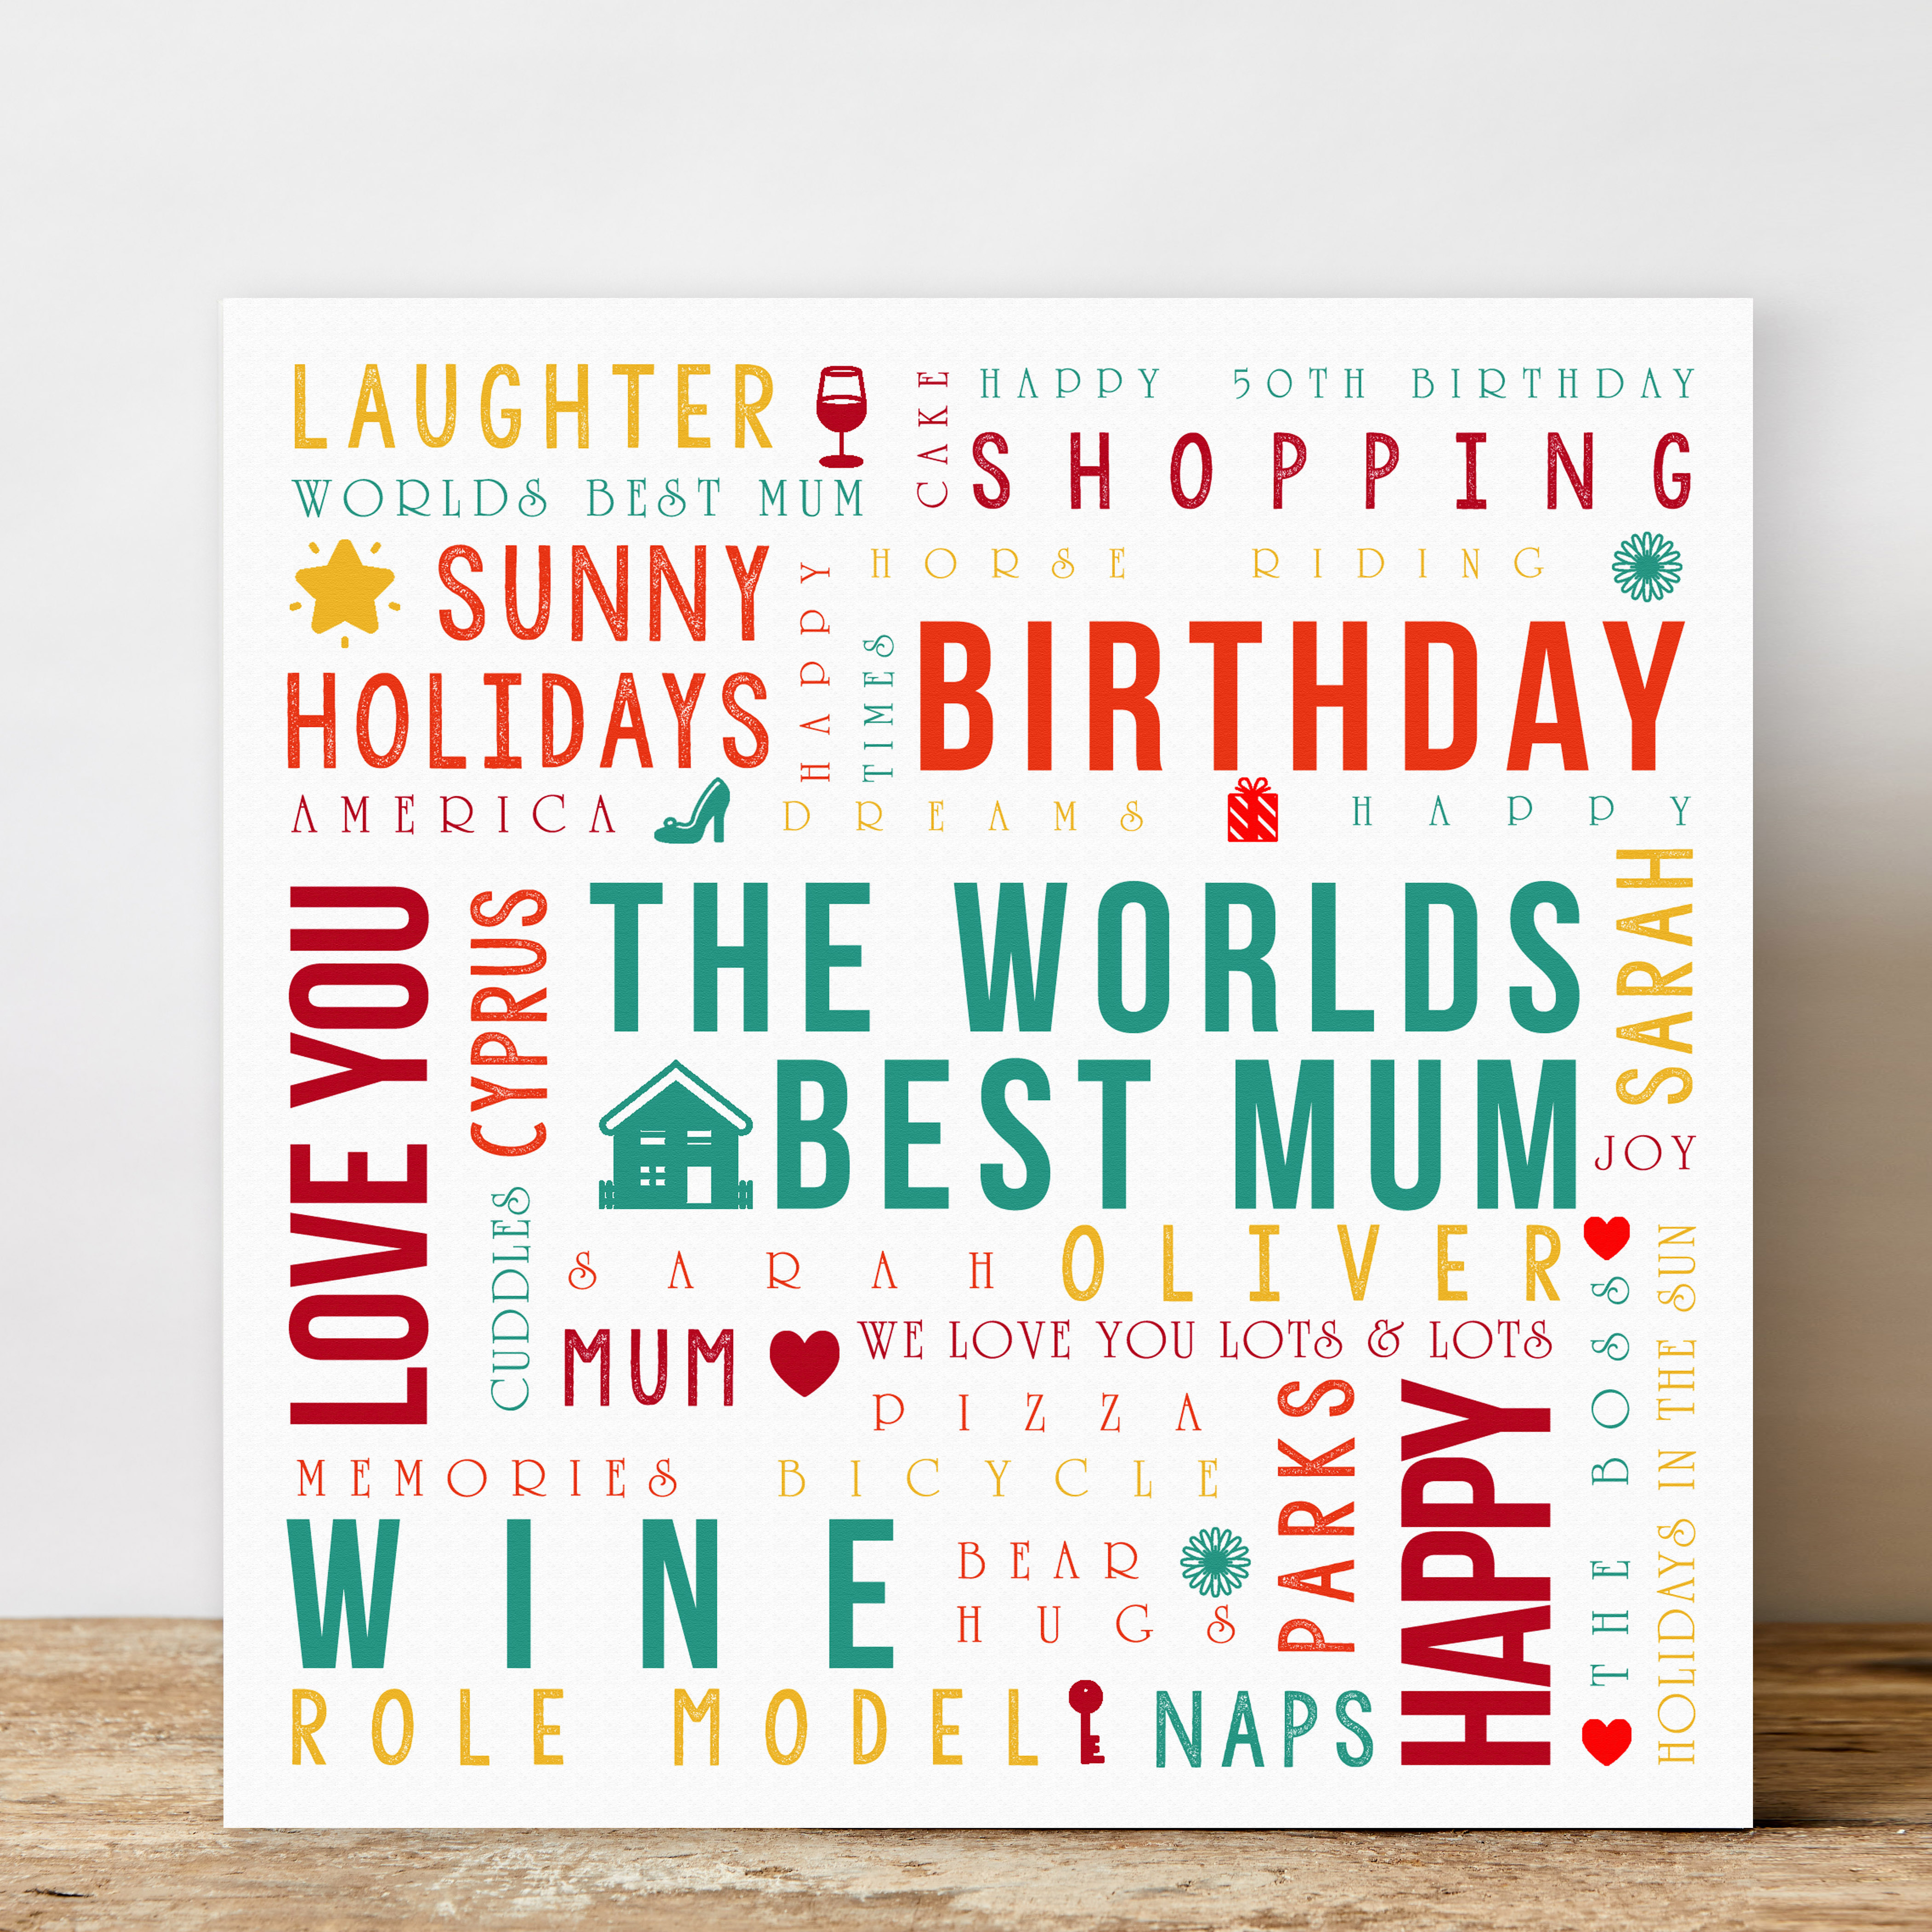 Check out some of our awesome word art prints that can be completely personalised by you such as our square word art, heart, retangle, new home, quote, destination, new baby and more!